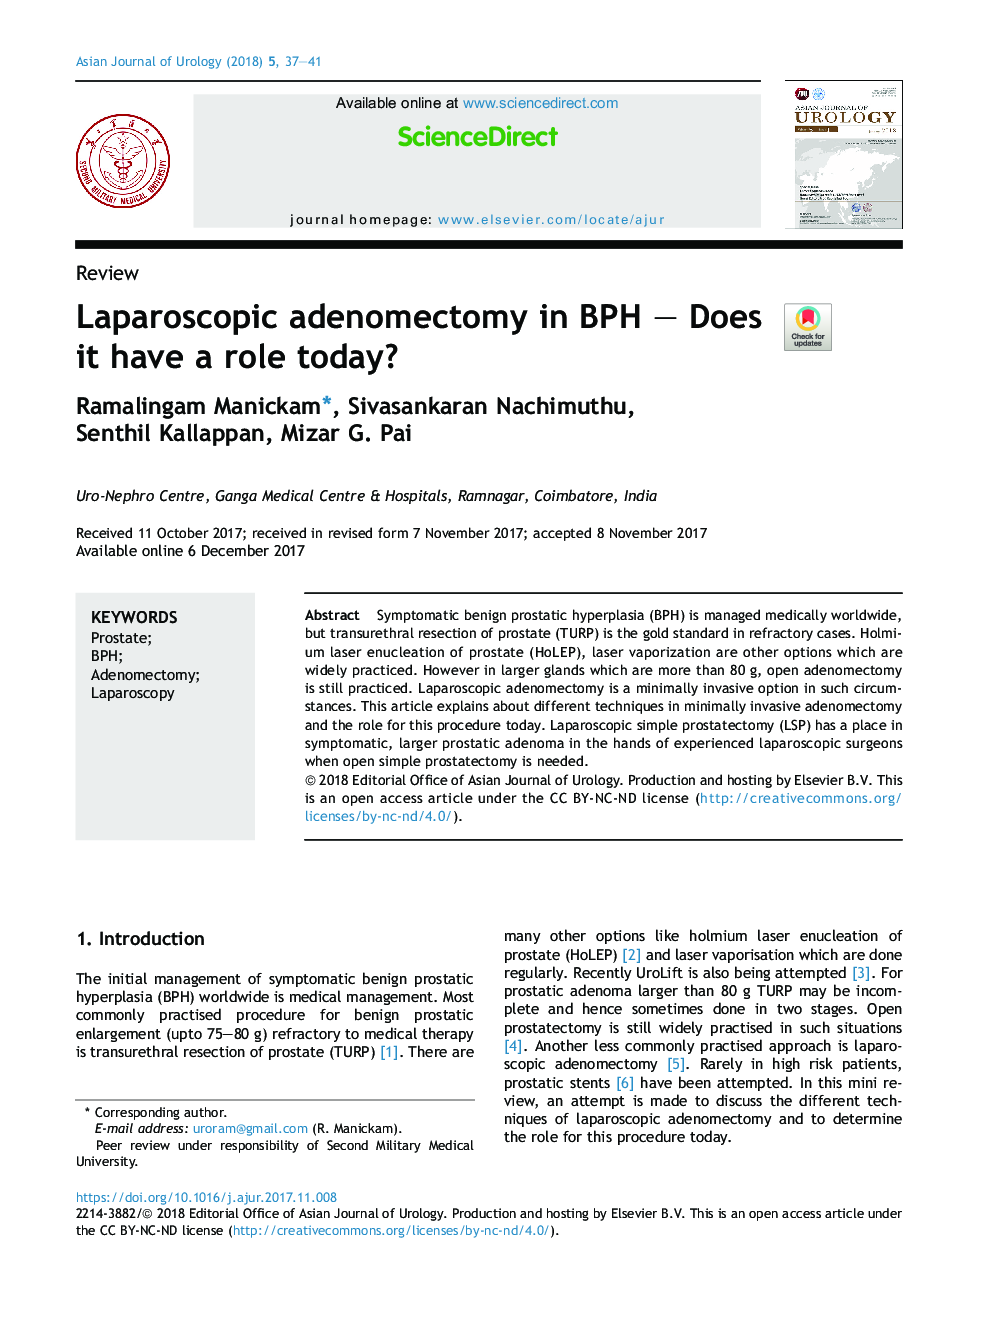 Laparoscopic adenomectomy in BPH - Does it have a role today?